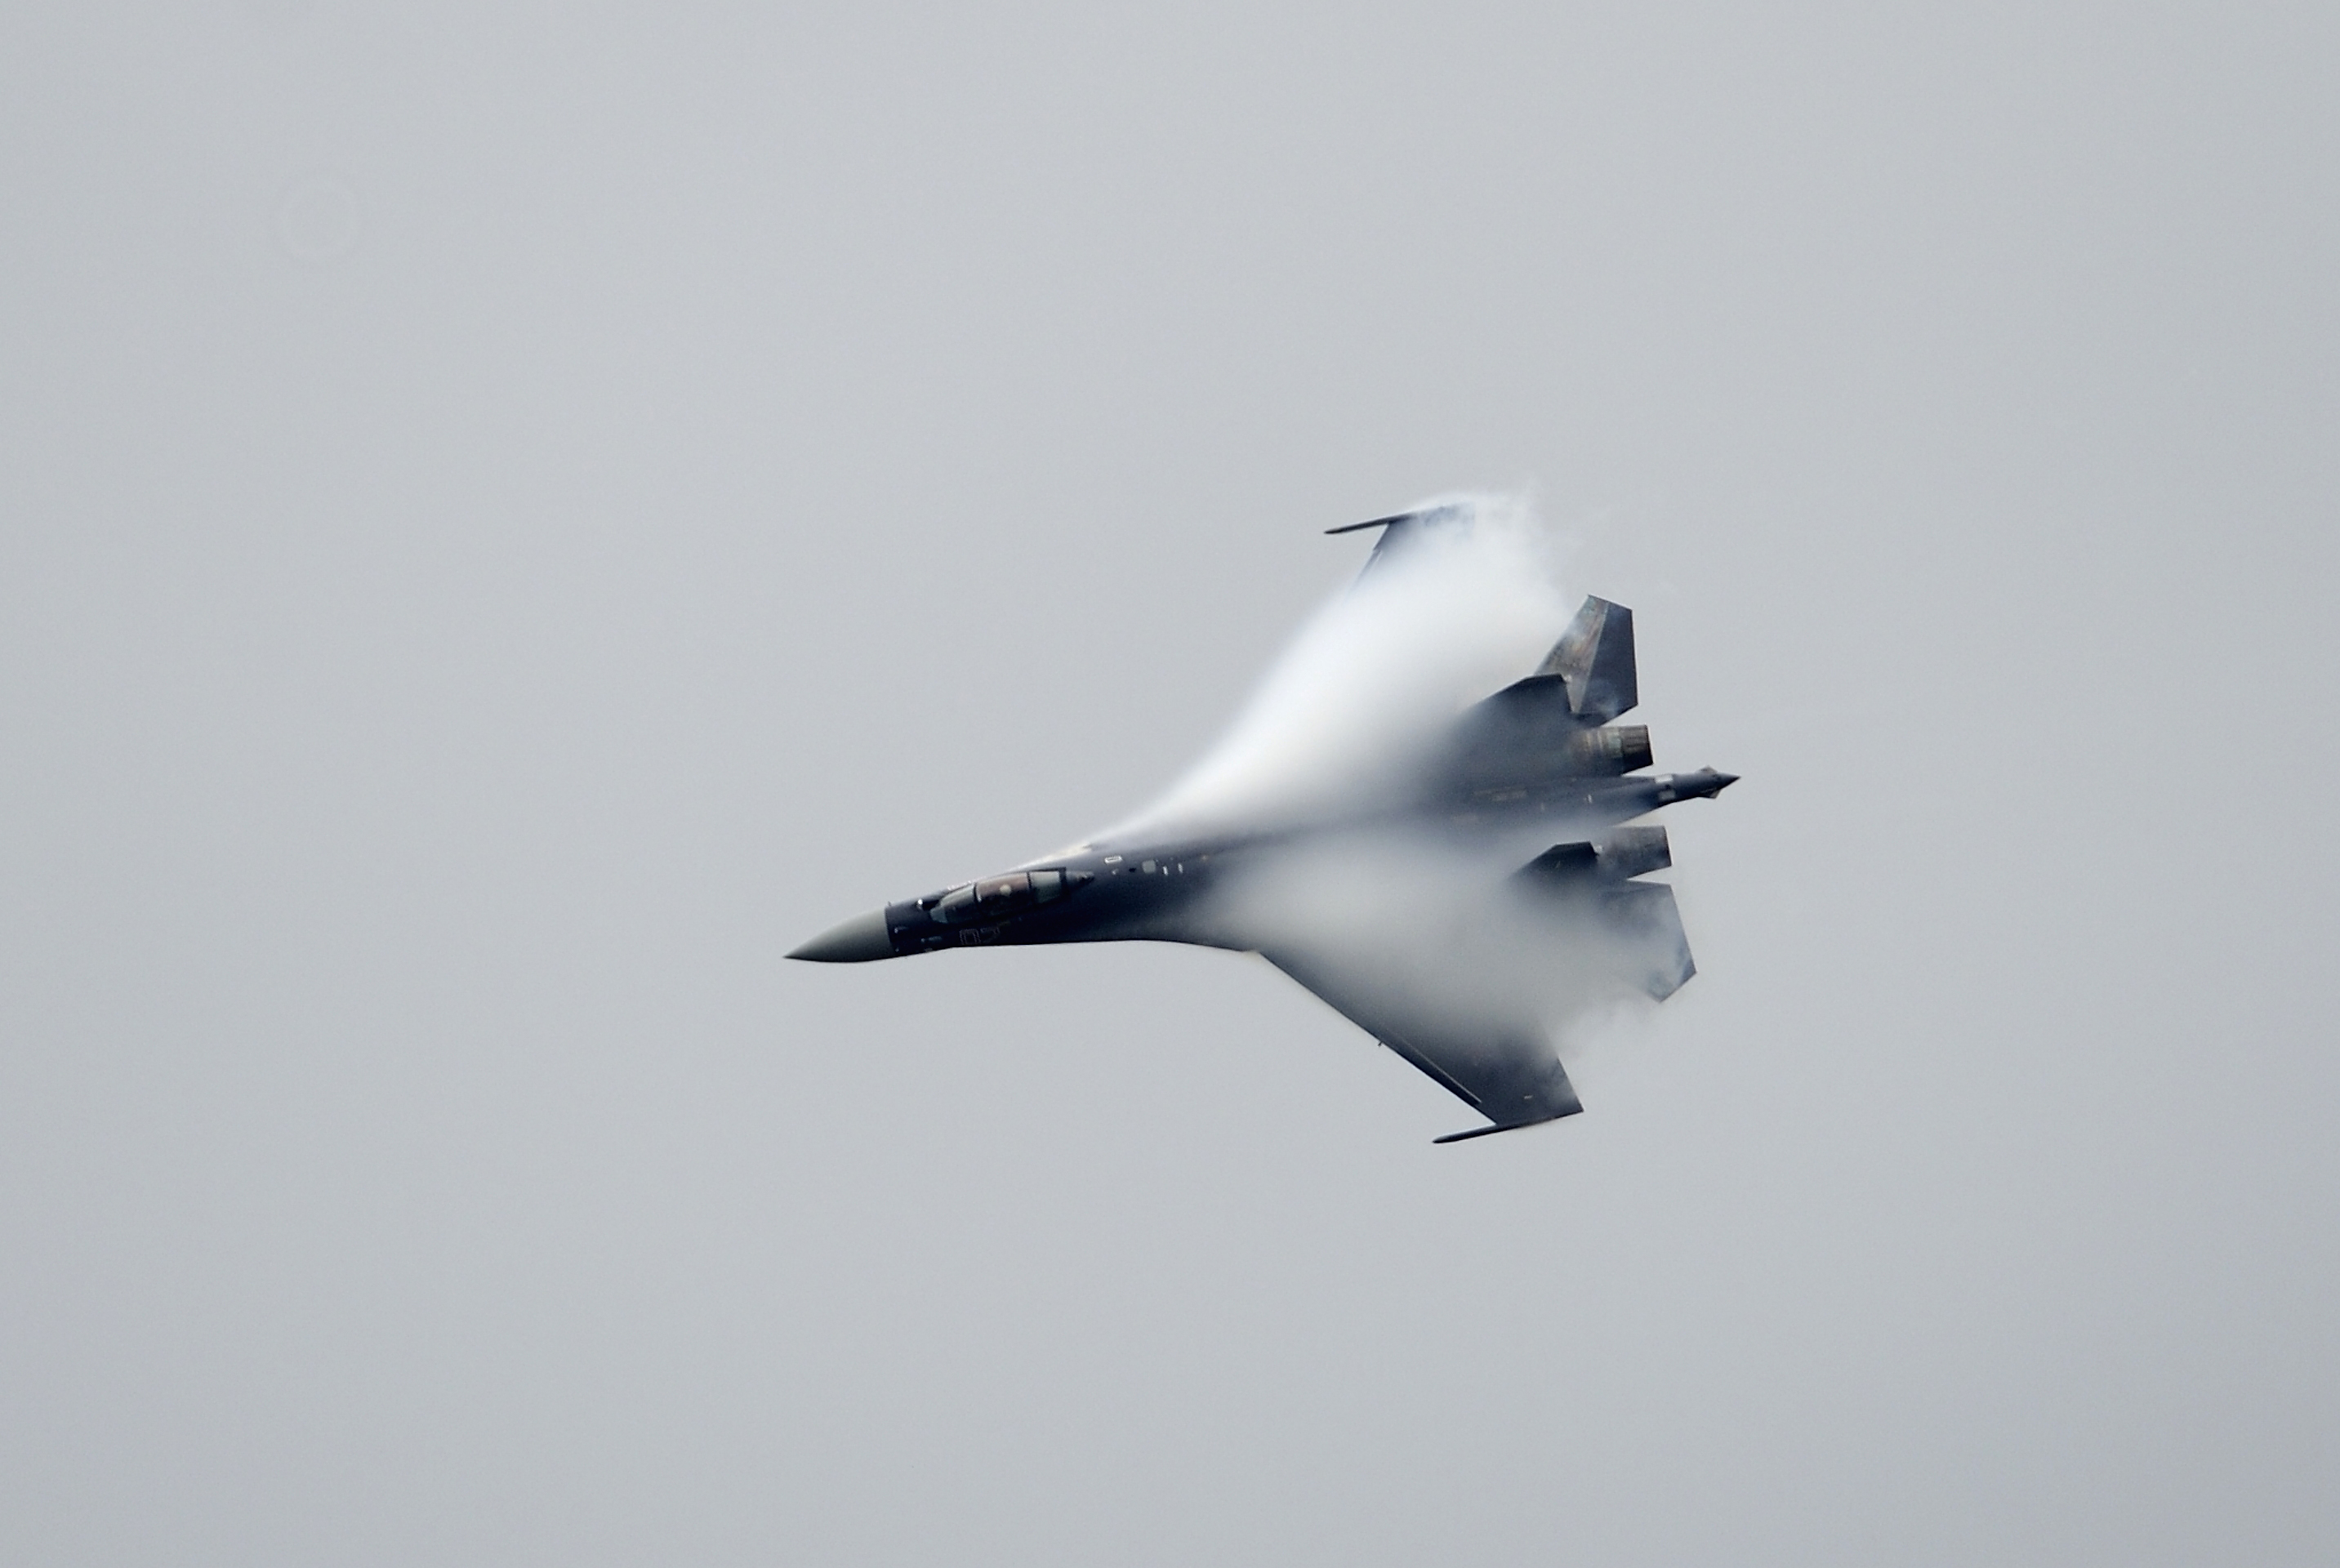 russian su-35 jet 'disappears from radars'